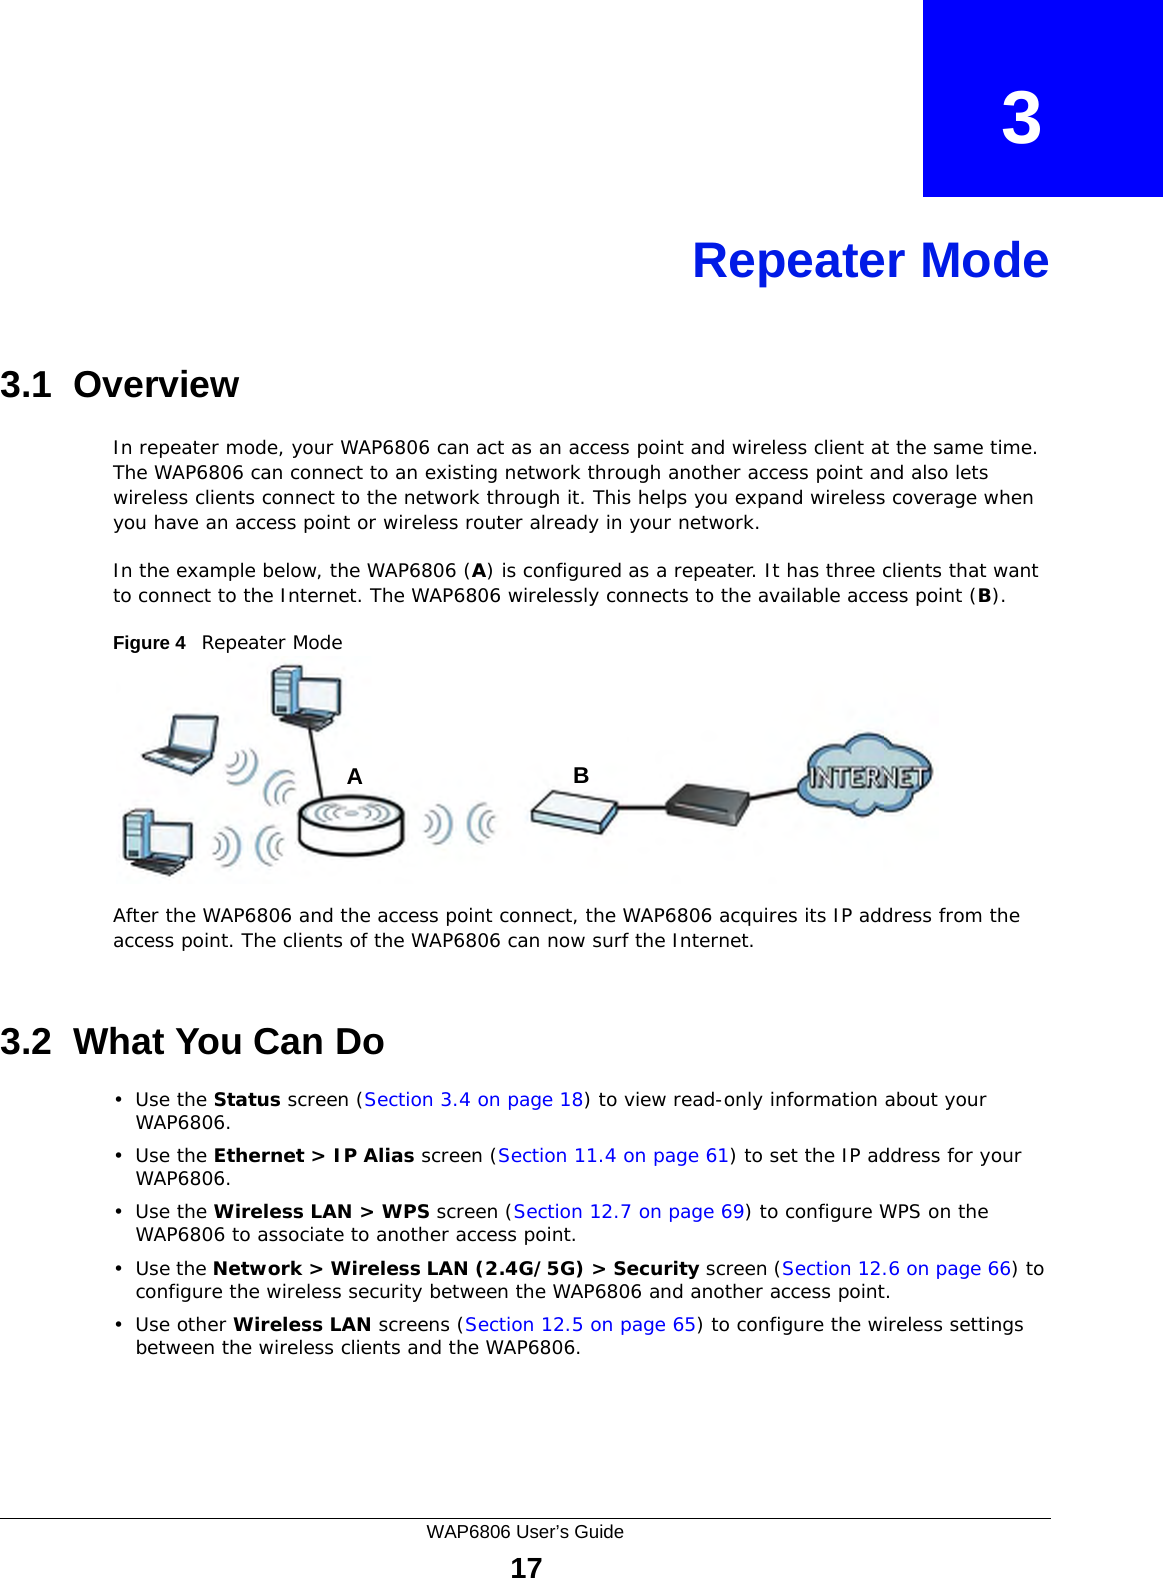 WAP6806 User’s Guide17CHAPTER   3Repeater Mode3.1  OverviewIn repeater mode, your WAP6806 can act as an access point and wireless client at the same time. The WAP6806 can connect to an existing network through another access point and also lets wireless clients connect to the network through it. This helps you expand wireless coverage when you have an access point or wireless router already in your network.In the example below, the WAP6806 (A) is configured as a repeater. It has three clients that want to connect to the Internet. The WAP6806 wirelessly connects to the available access point (B). Figure 4   Repeater Mode After the WAP6806 and the access point connect, the WAP6806 acquires its IP address from the access point. The clients of the WAP6806 can now surf the Internet. 3.2  What You Can Do•Use the Status screen (Section 3.4 on page 18) to view read-only information about your WAP6806.•Use the Ethernet &gt; IP Alias screen (Section 11.4 on page 61) to set the IP address for your WAP6806.•Use the Wireless LAN &gt; WPS screen (Section 12.7 on page 69) to configure WPS on the WAP6806 to associate to another access point. •Use the Network &gt; Wireless LAN (2.4G/5G) &gt; Security screen (Section 12.6 on page 66) to configure the wireless security between the WAP6806 and another access point. •Use other Wireless LAN screens (Section 12.5 on page 65) to configure the wireless settings between the wireless clients and the WAP6806.AB